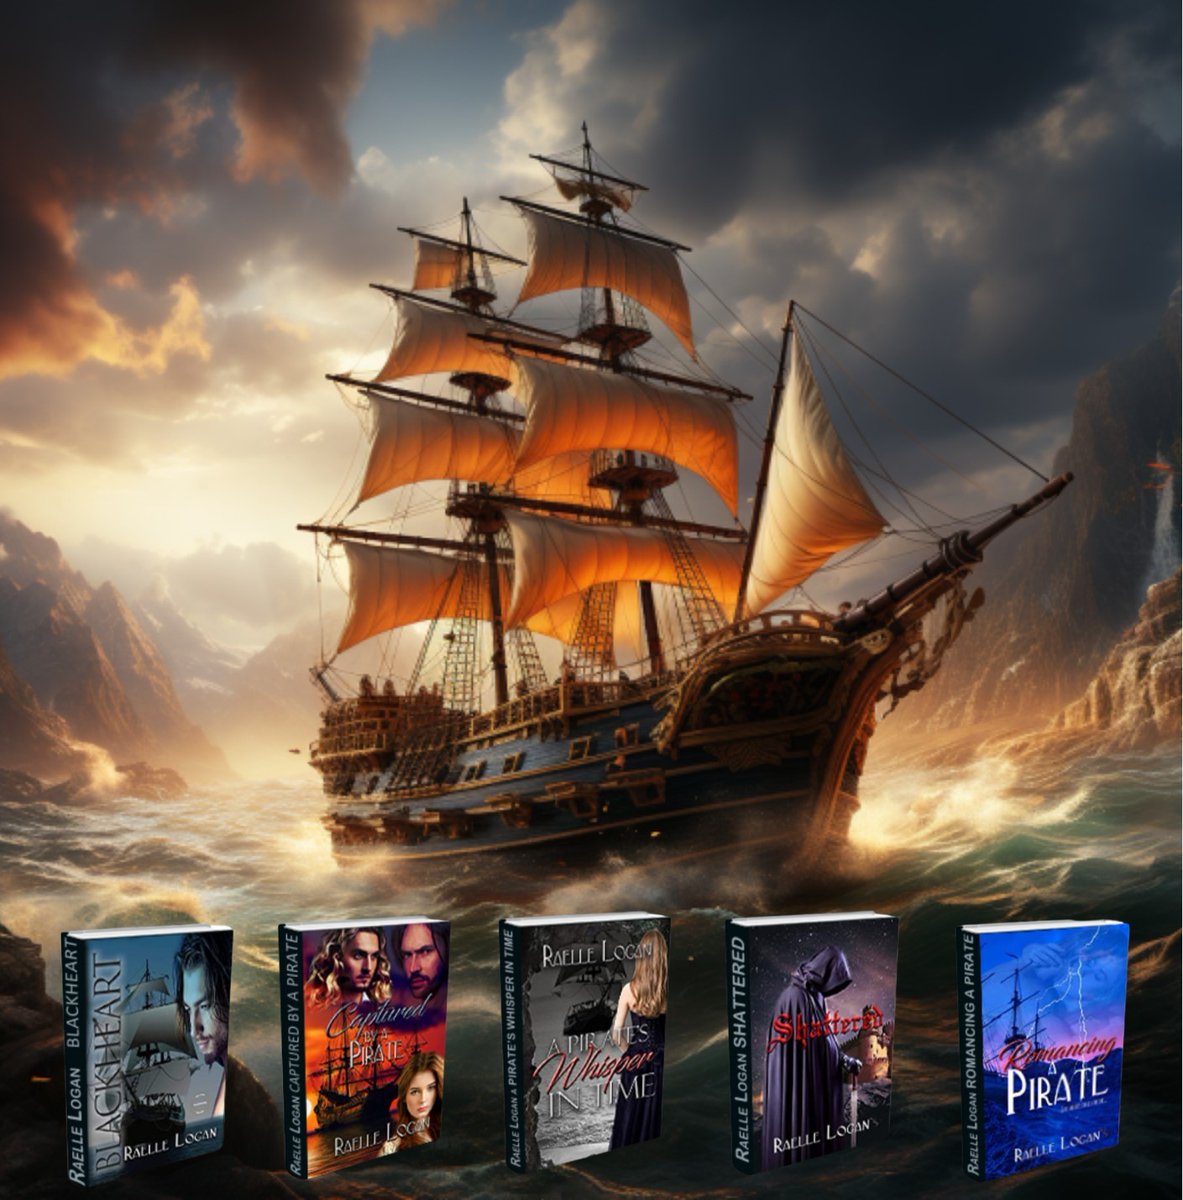 Escape into another Time with a Pirate into an Exciting, High Seas Adventure. #booklovers #books #romance #PirateBooks #romanticsuspense #historicalromance #historicalfiction #booksworthreading #RomanceReaders #BookRecommendations amazon.com/author/raellel…